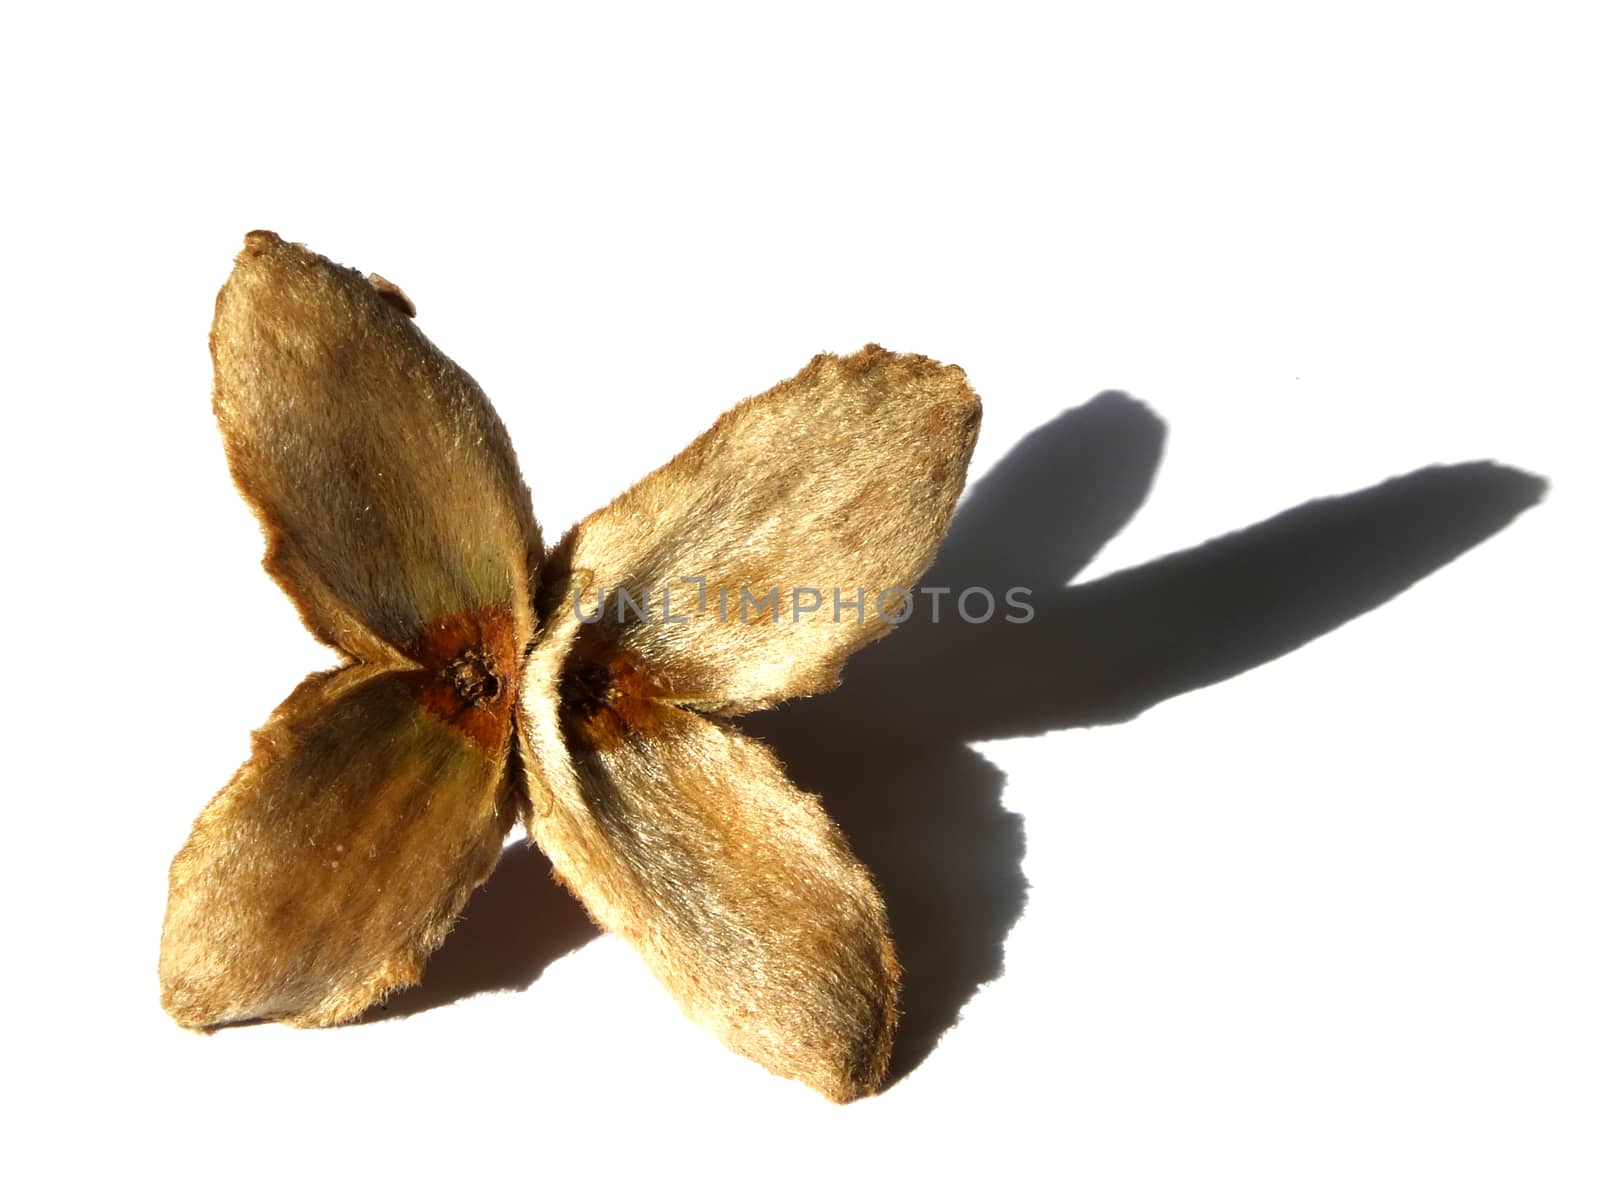 an open beech nut husk on a white background with shadow